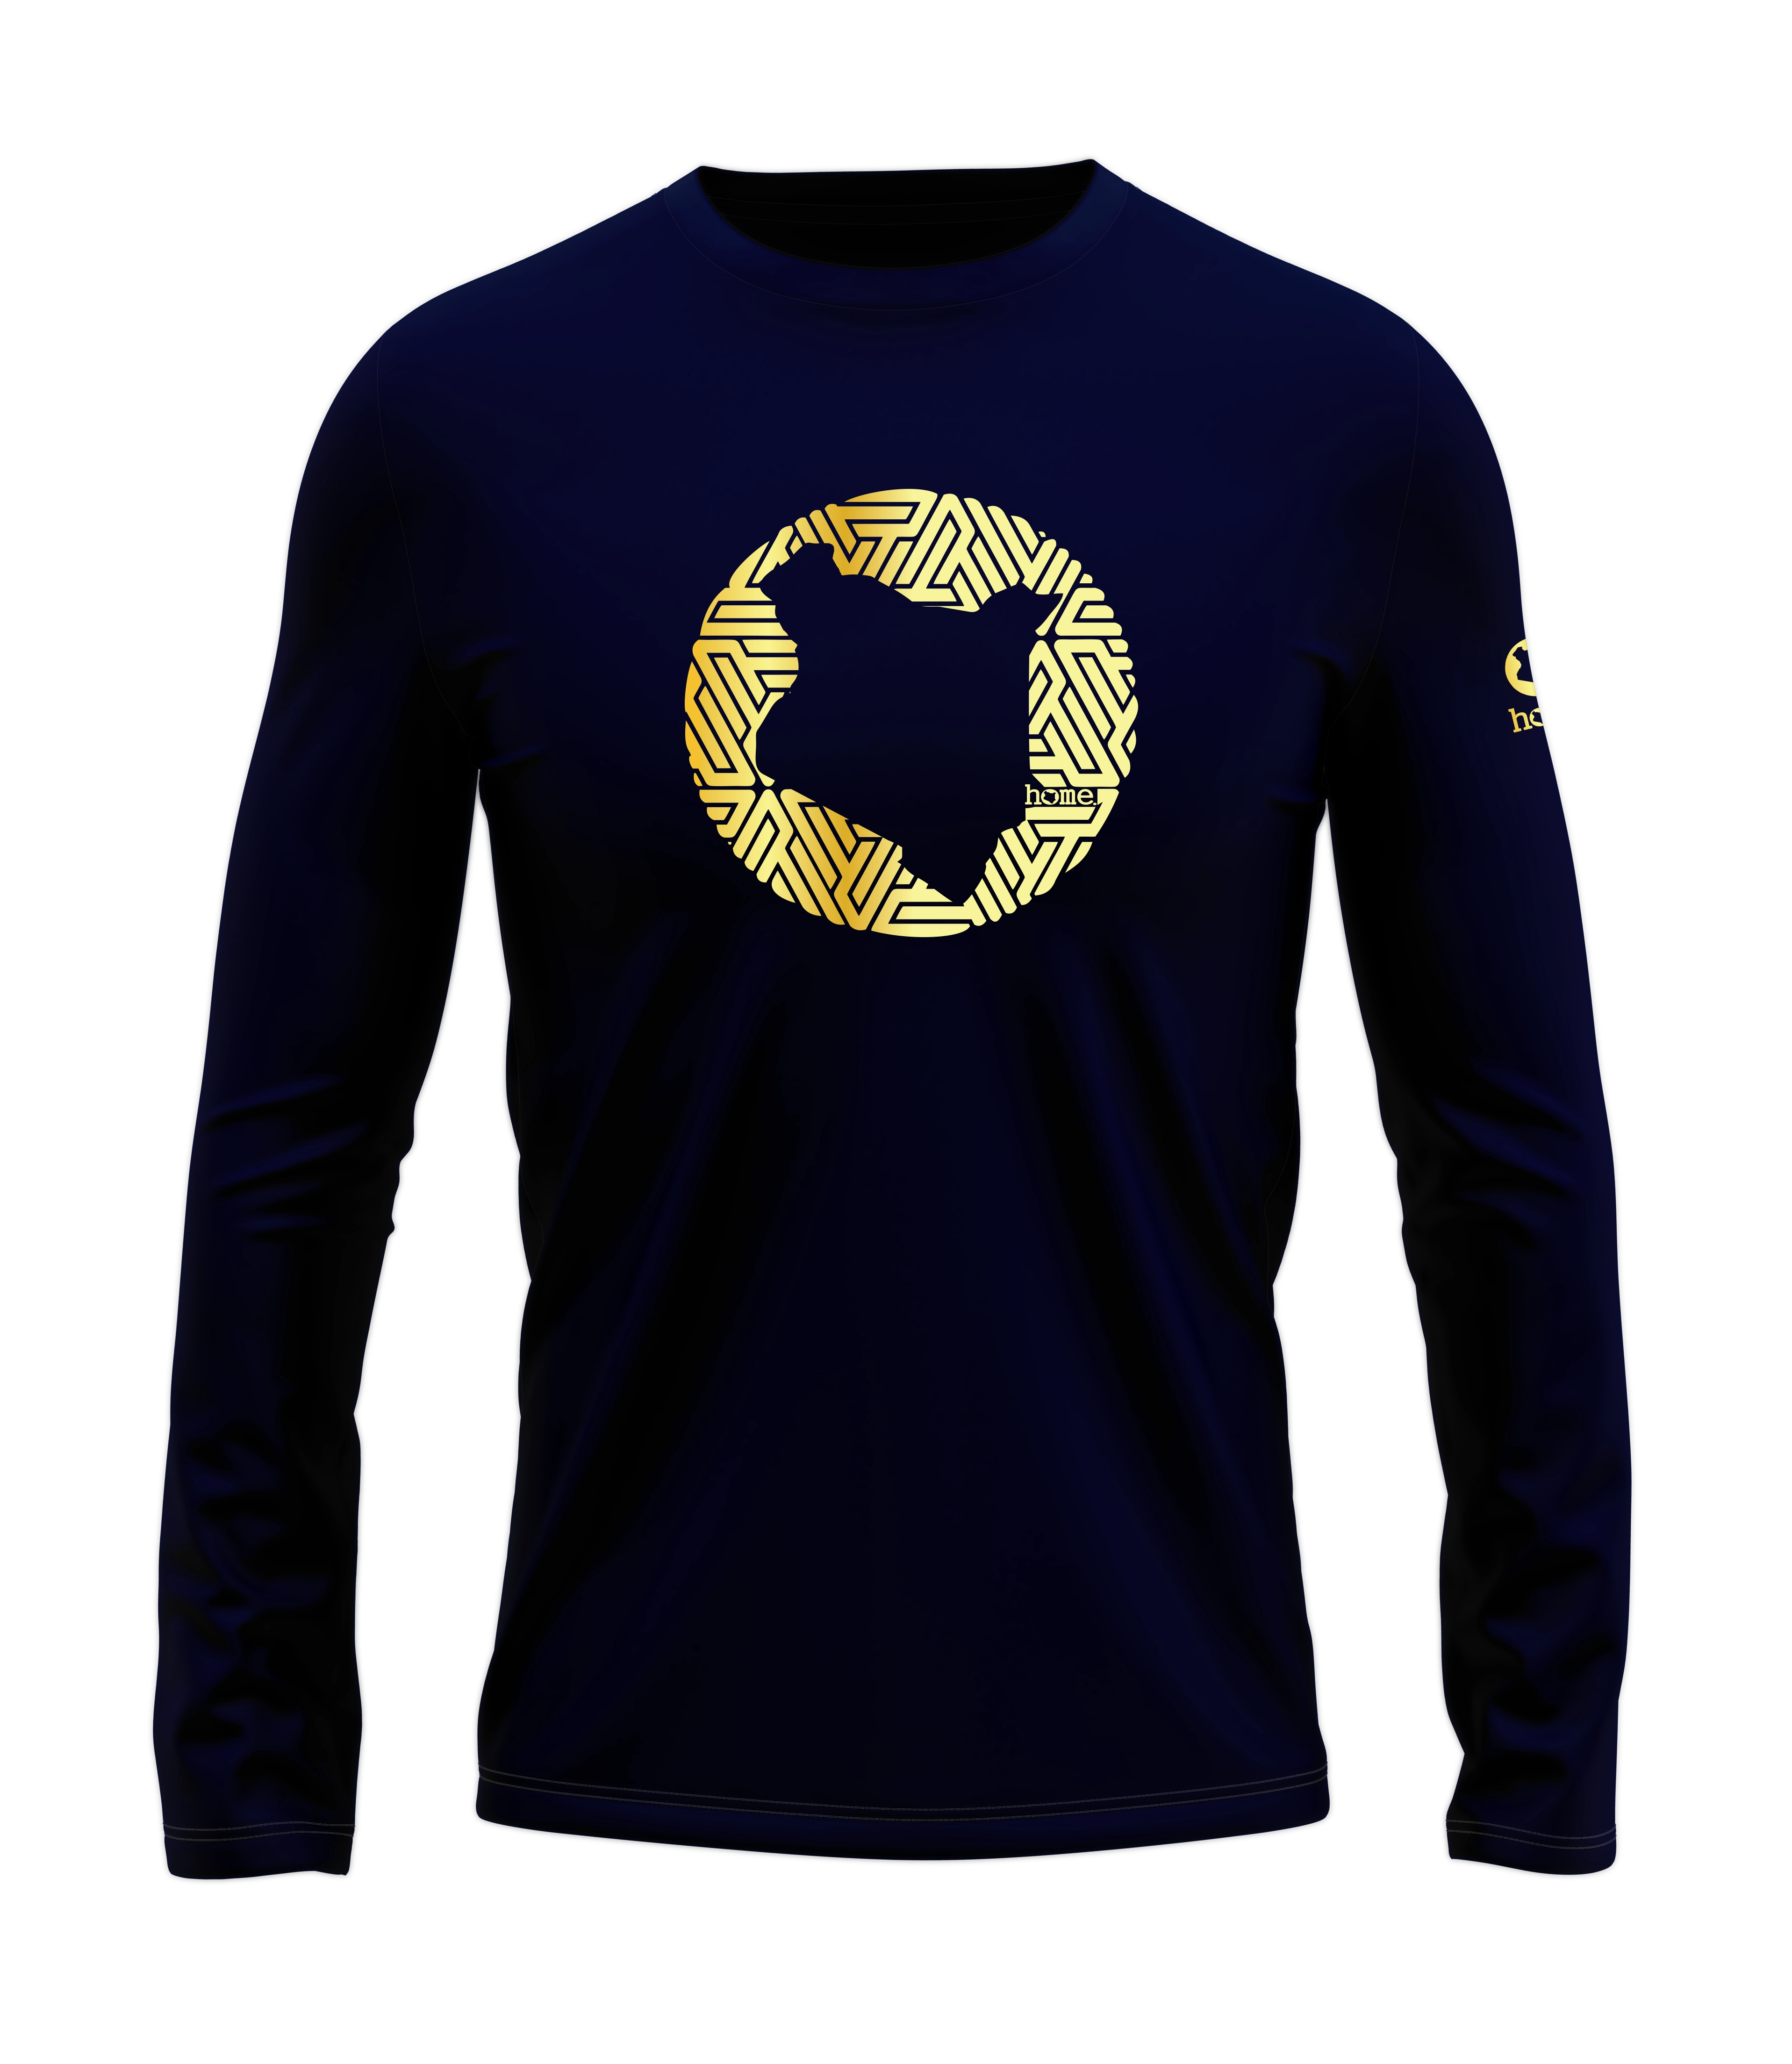 home_254 LONG-SLEEVED NAVY BLUE T-SHIRT WITH A GOLD MAP PRINT – COTTON PLUS FABRIC